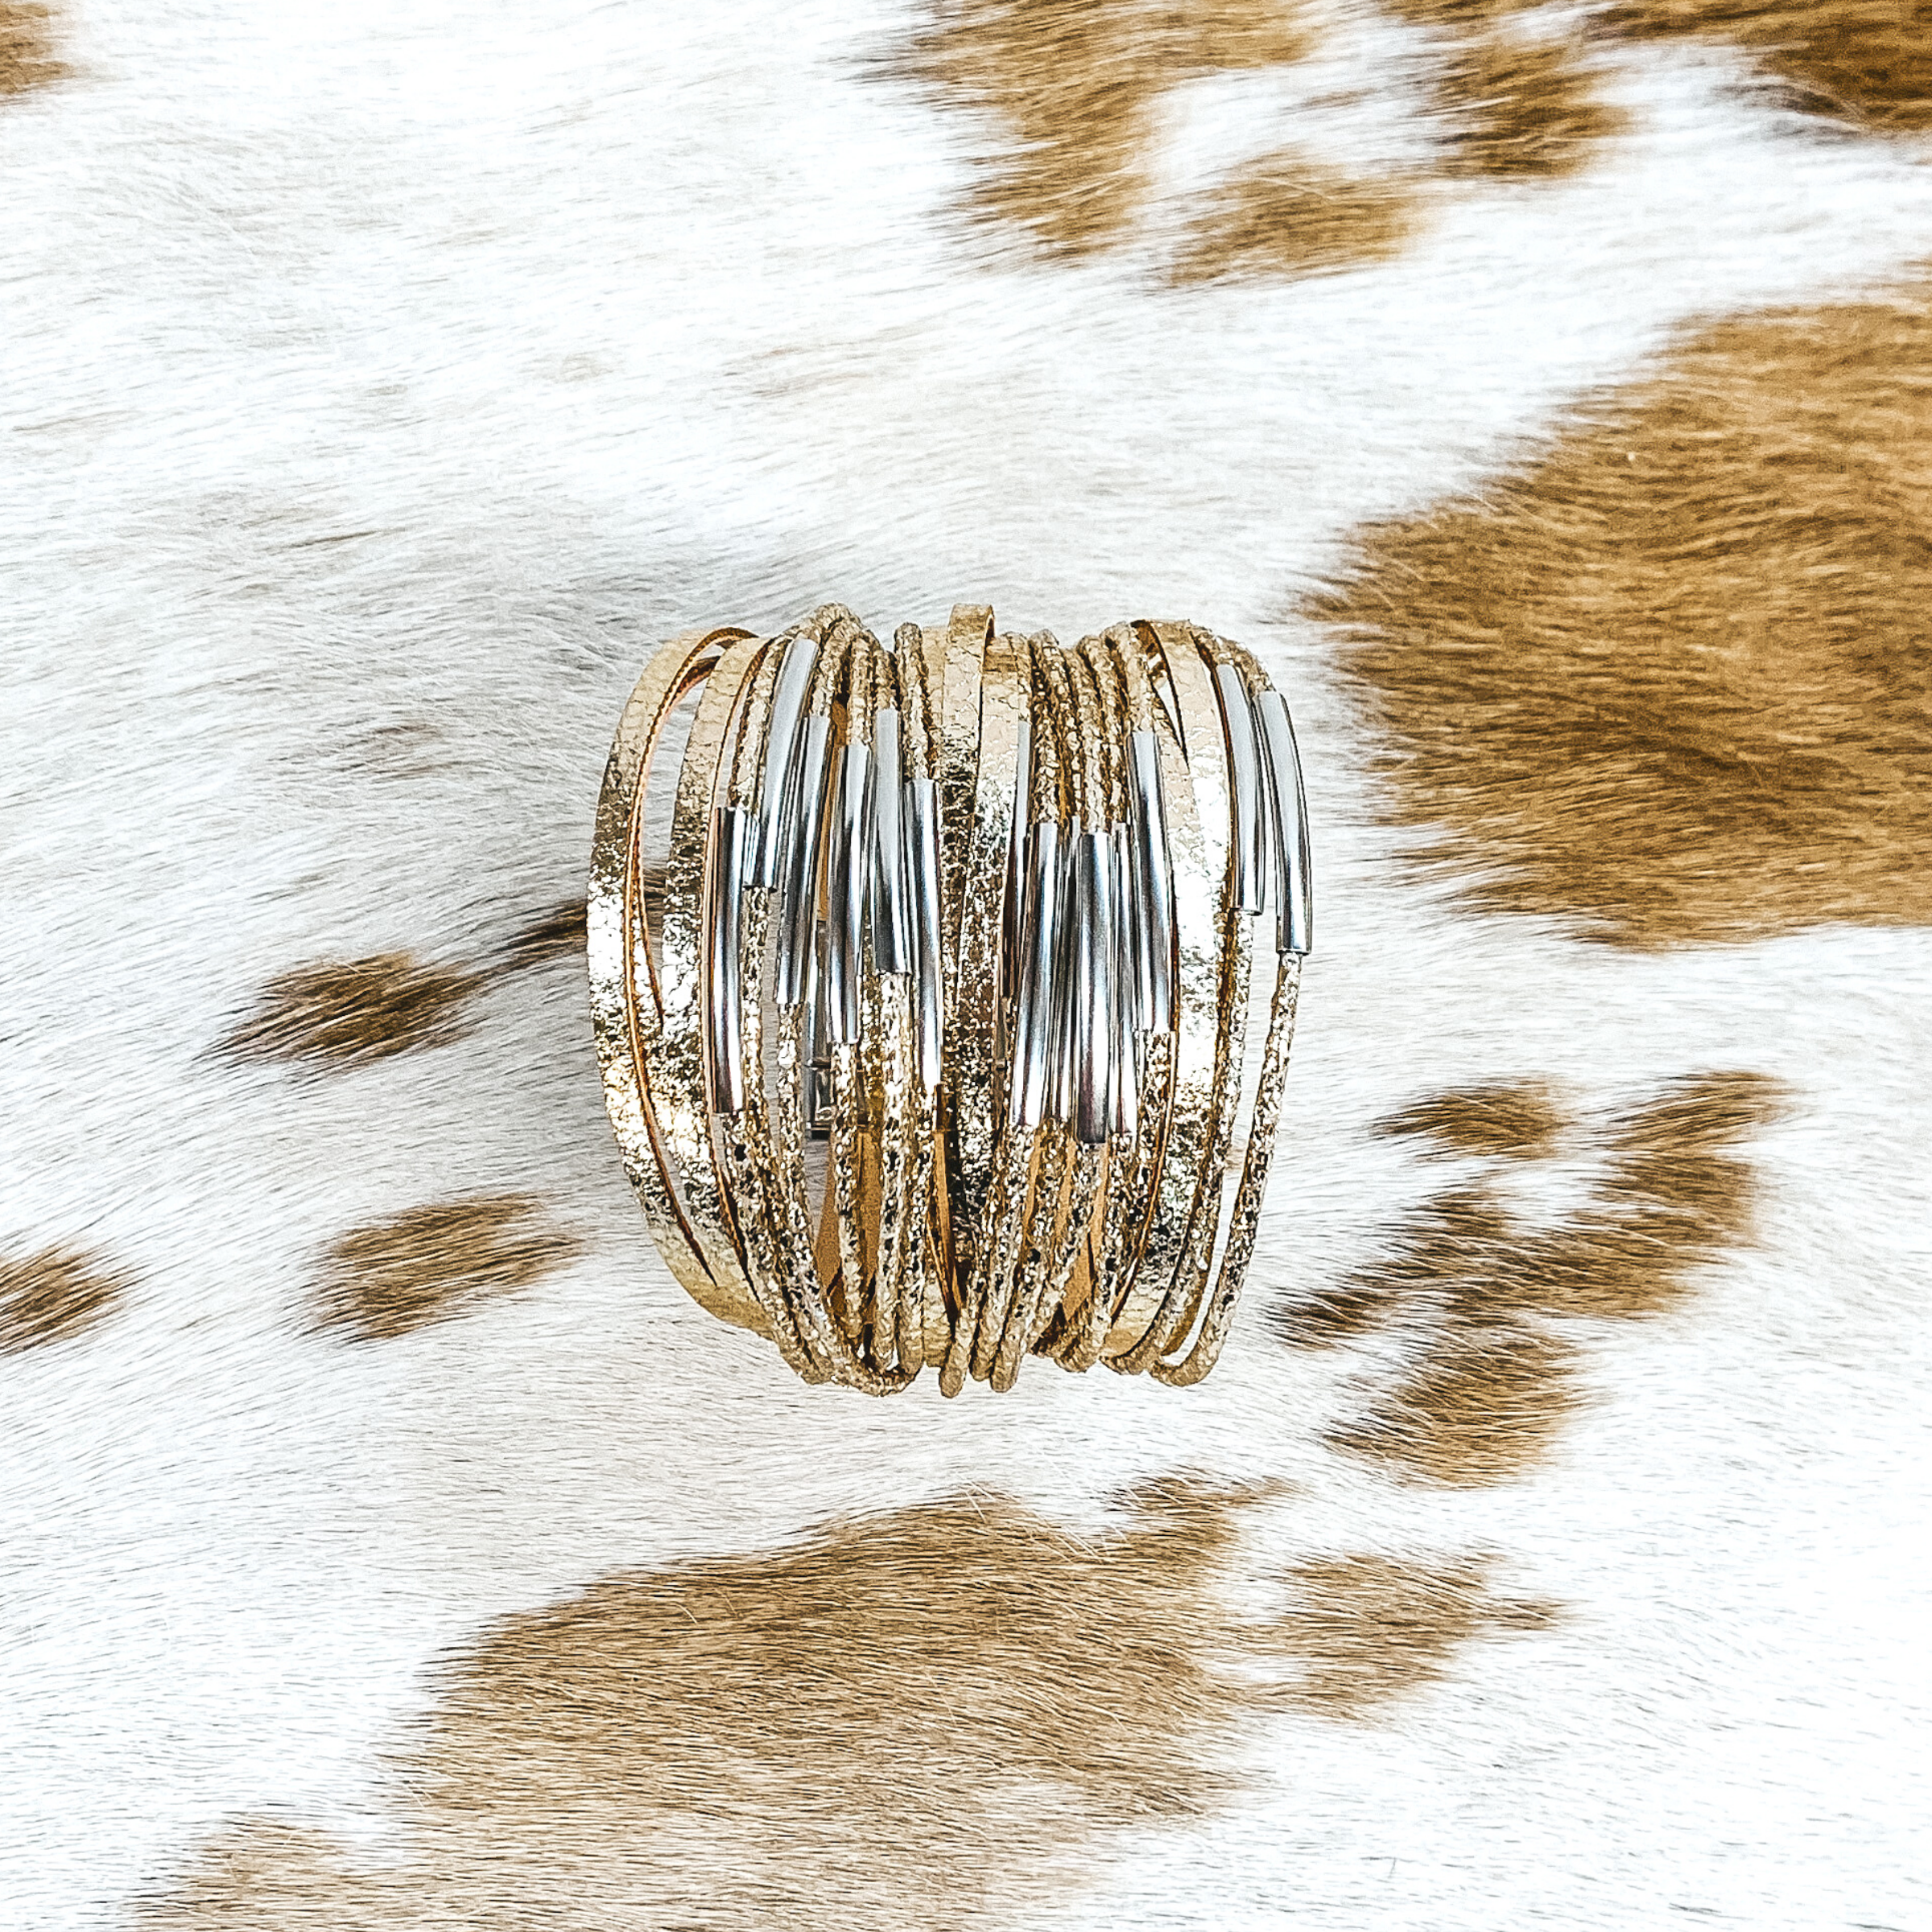 This bracelet has a lot of gold destressed strands with some of them having silver bar pendants. This bracelet is pictured on a white and brown cow print background. 